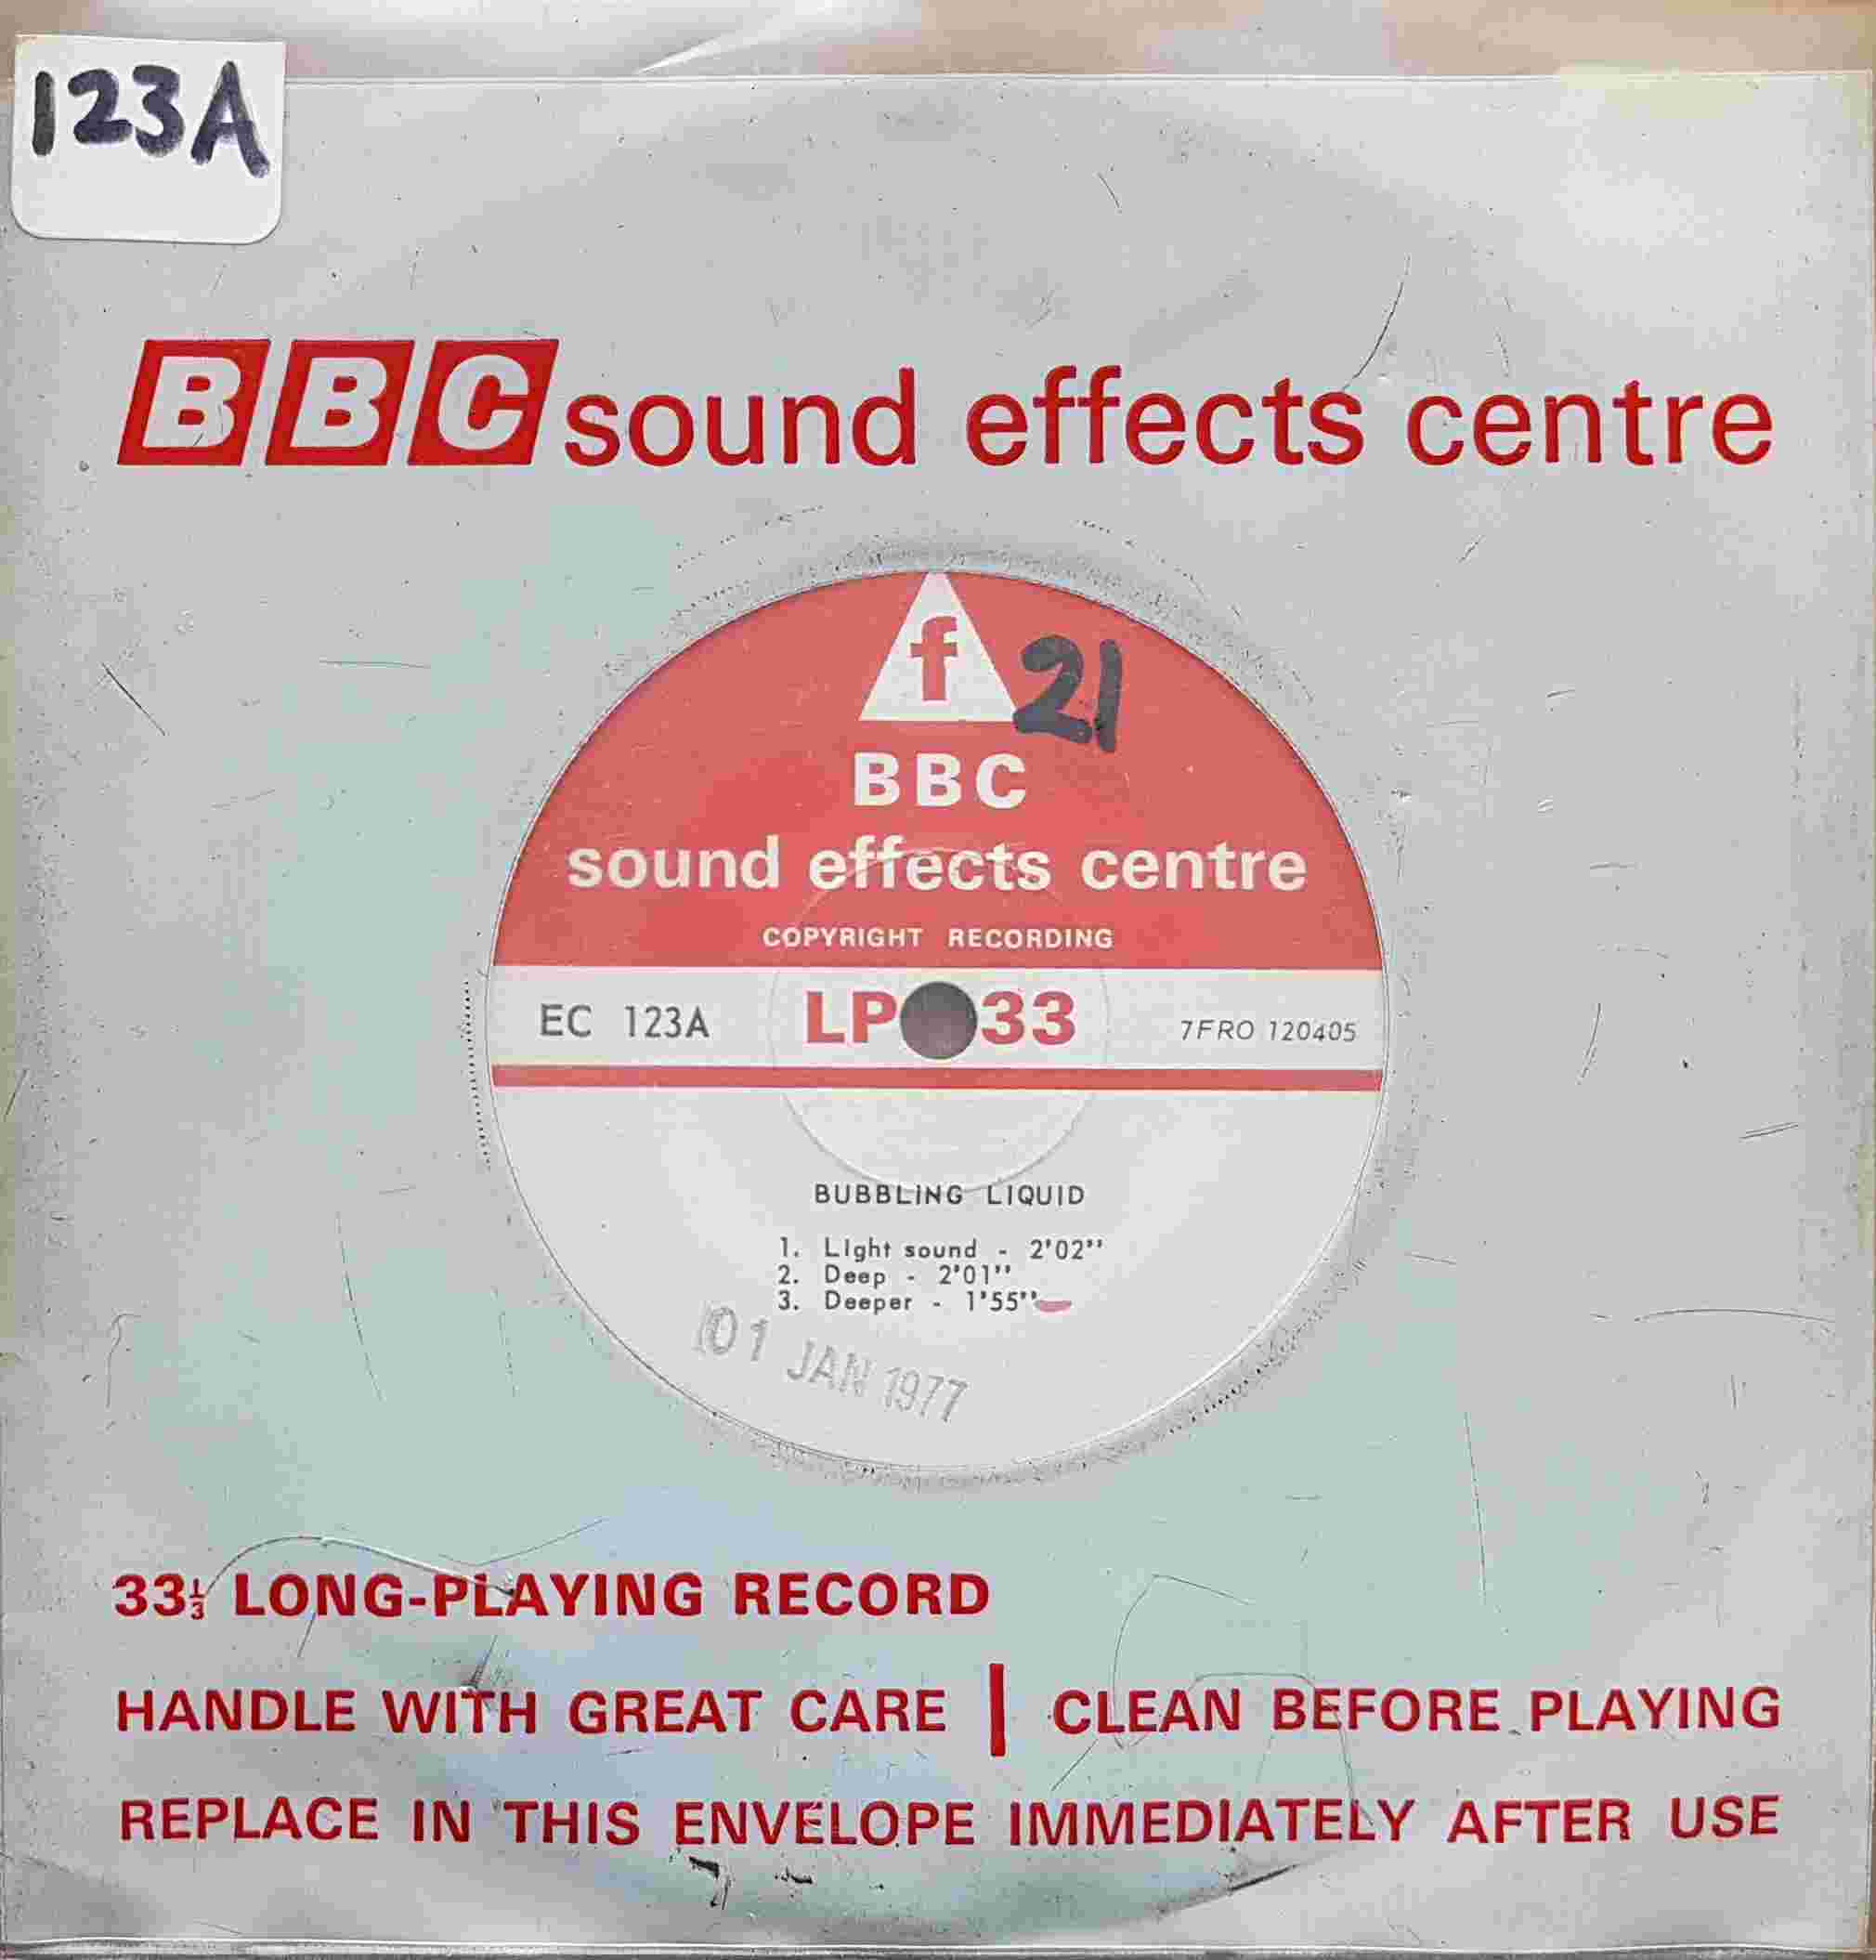 Picture of EC 123A Bubbling liquid by artist Not registered from the BBC singles - Records and Tapes library